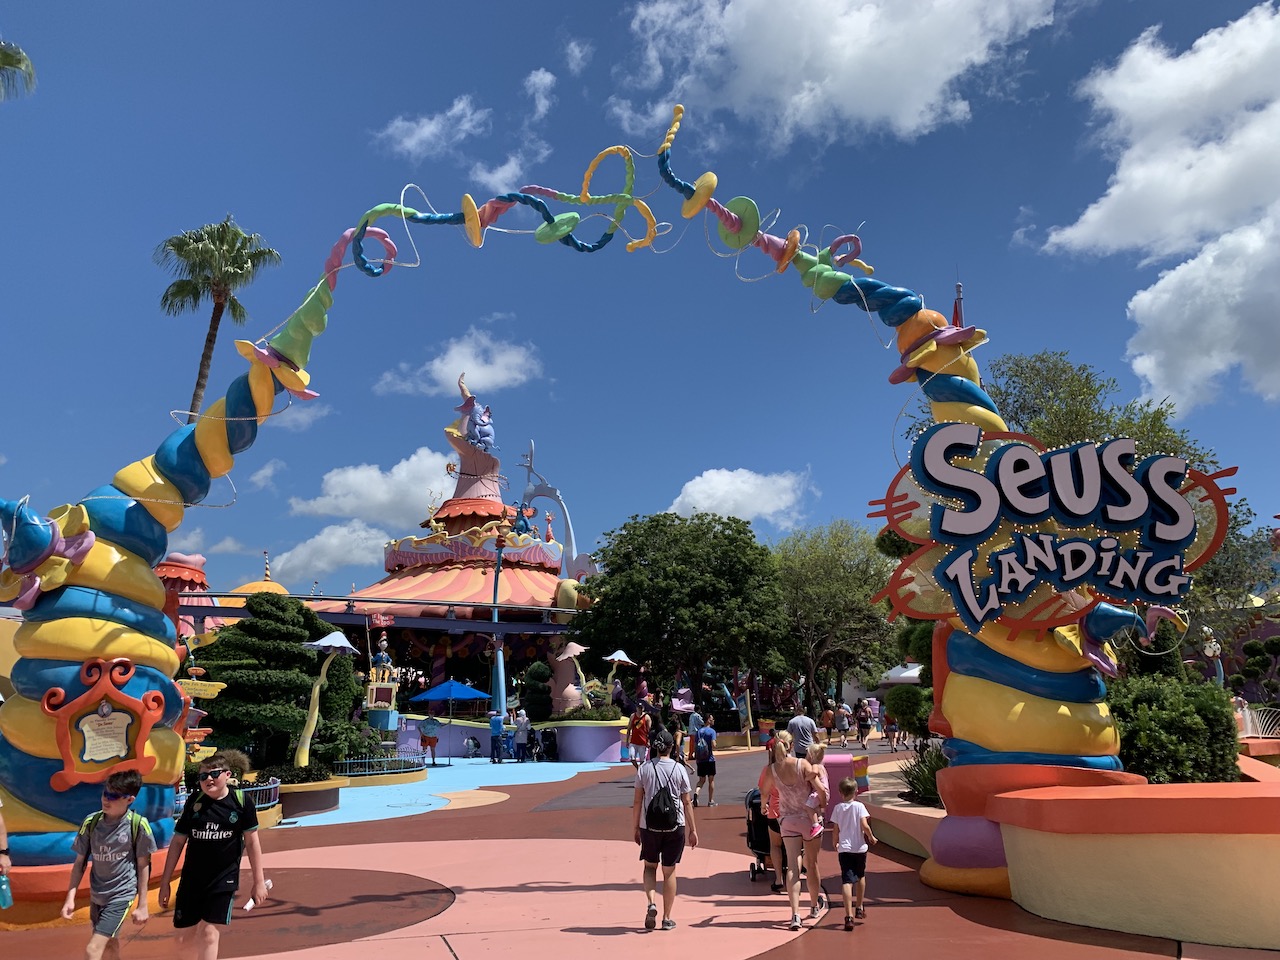 Best Tips for Universal's Islands of Adventure with Kids - Mess for Less